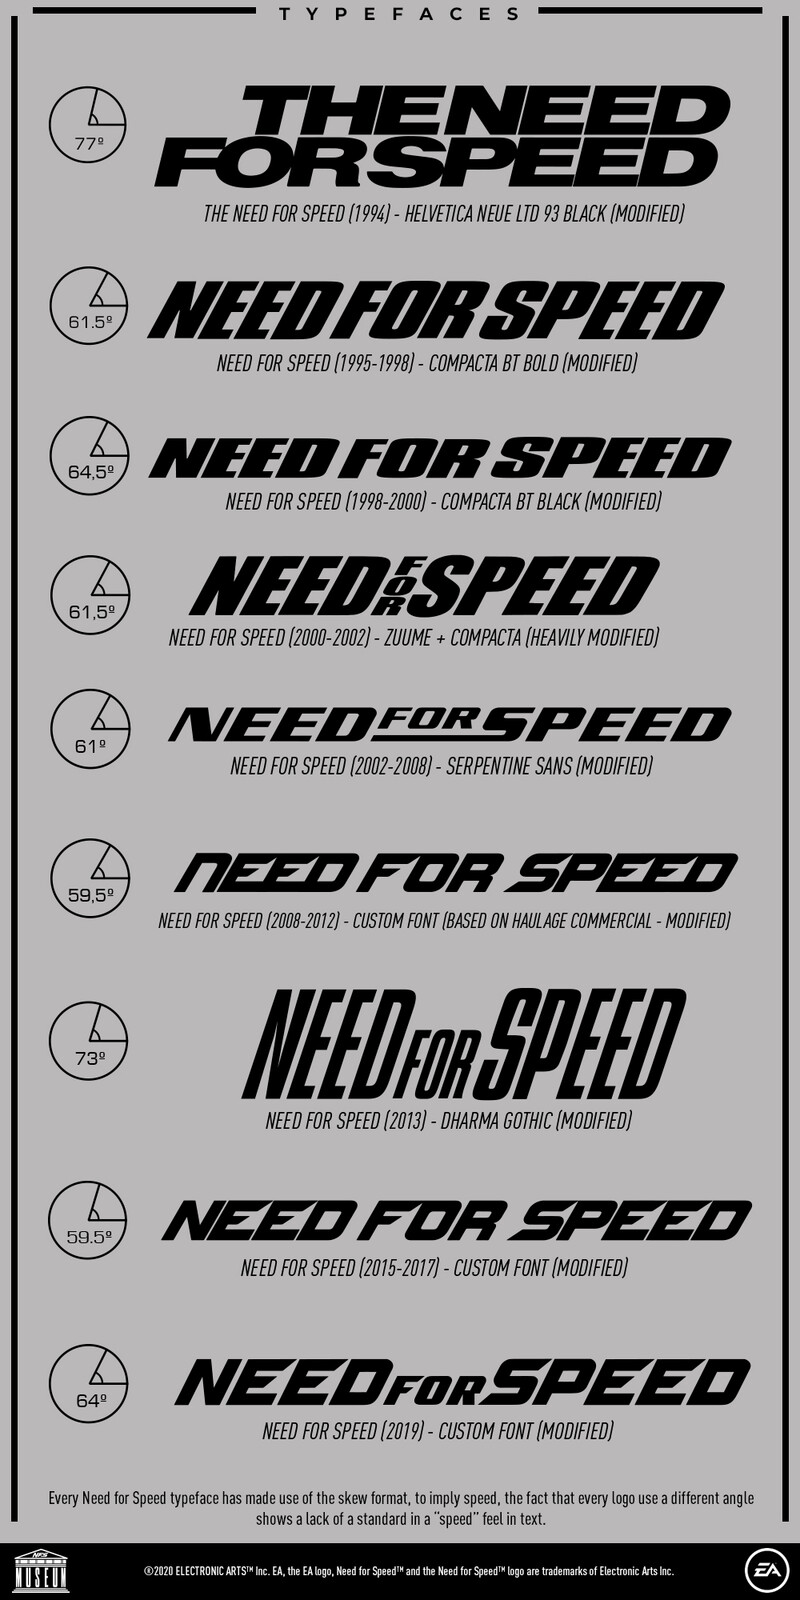 Need for Speed™ Typefaces Evolution.